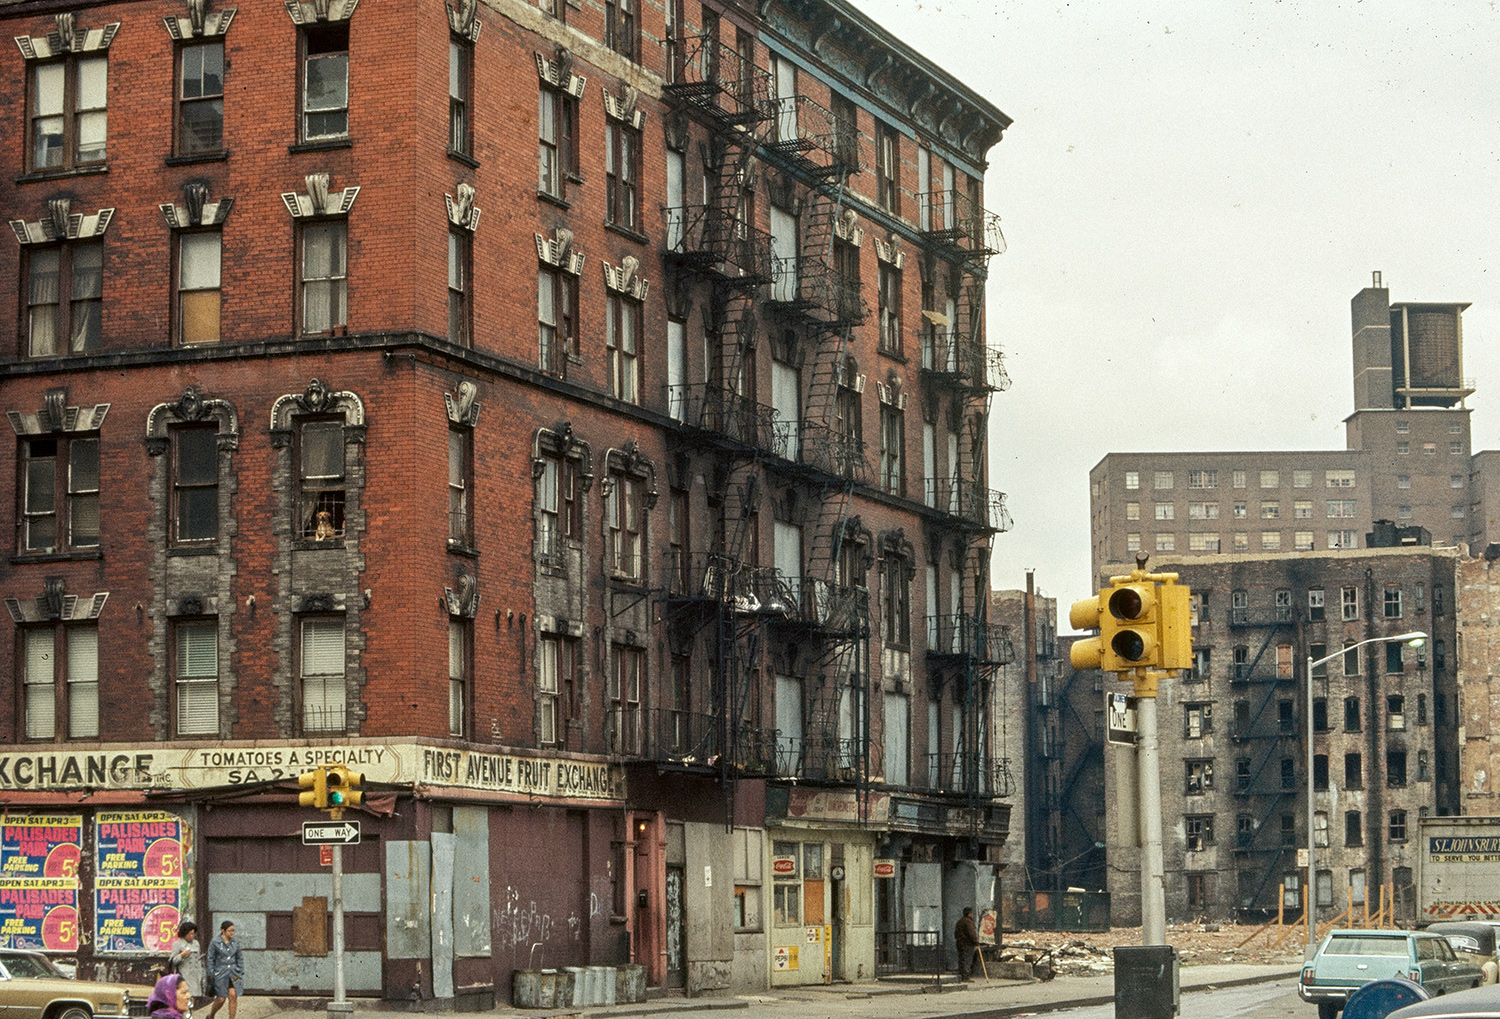 Corner view of a six-story tenement building in New York City with its storefronts boarded up.